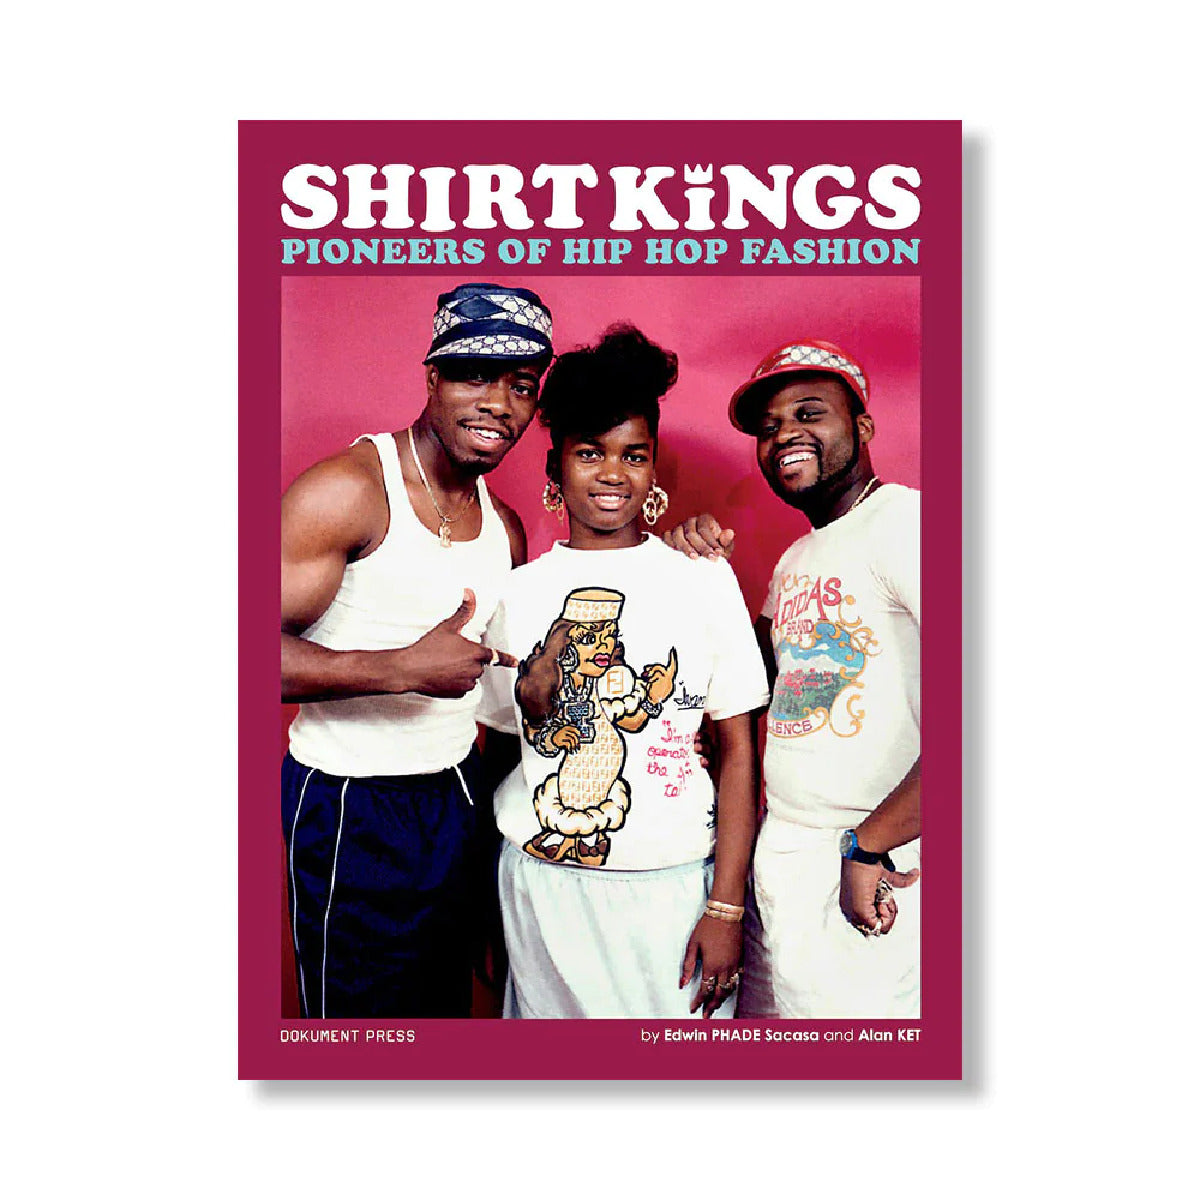 Shirt Kings: Pioneers of Hip Hop Fashion - Signed Copy